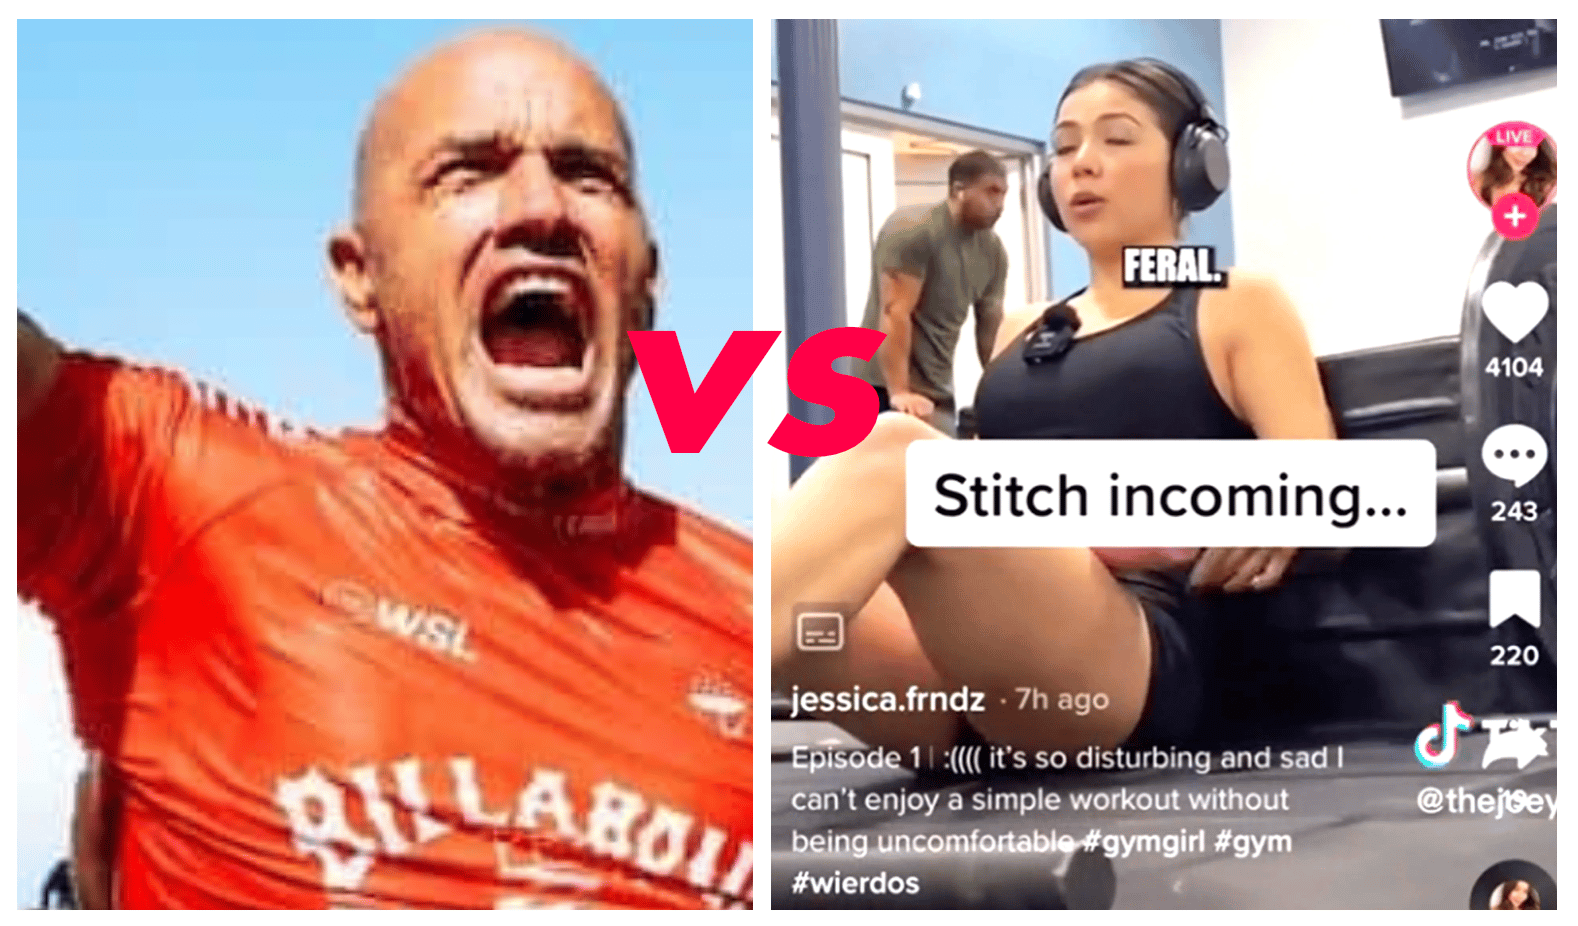 Twitch star Jessica Fernandez slammed by worlds greatest surfer Kelly Slater after claim she was sexually harassed by jacked gym stud, “What if I just ripped his pp out of its socket